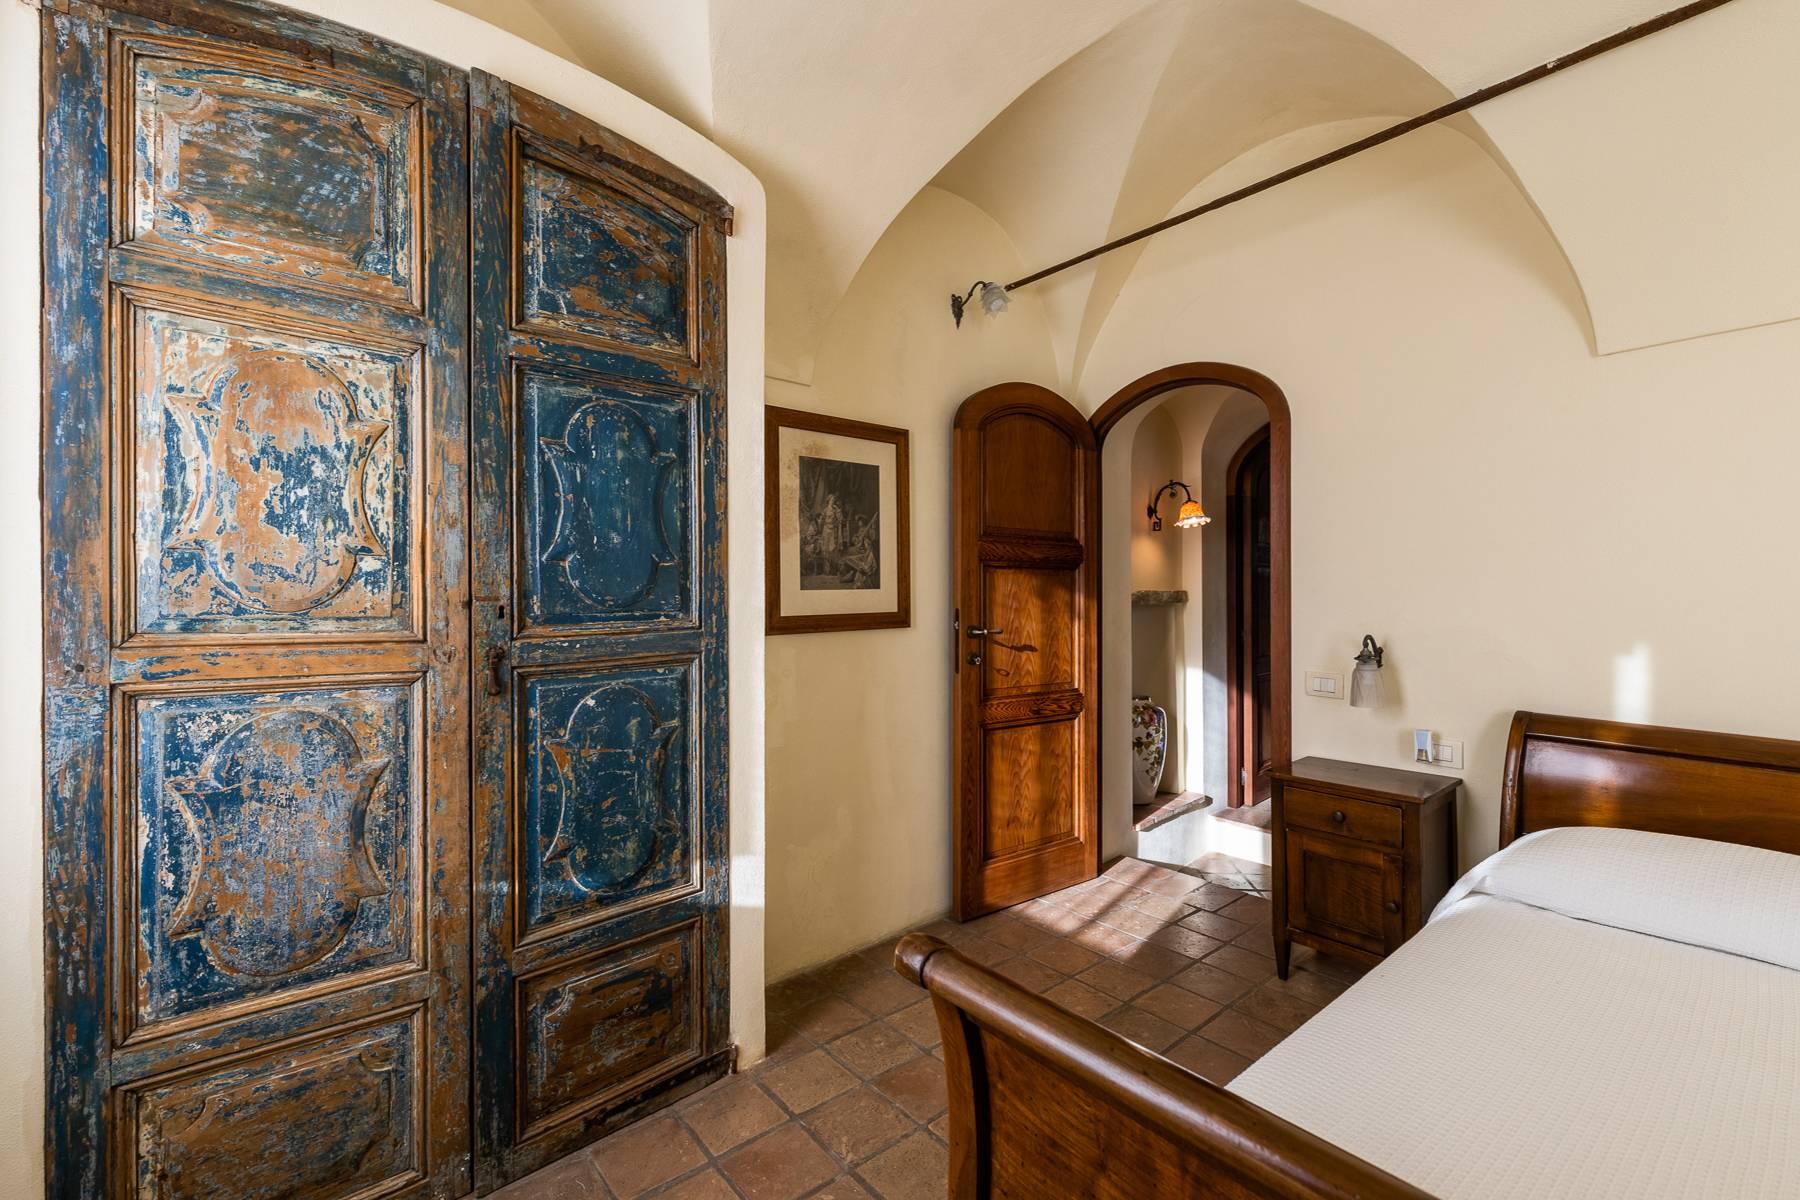 Charming villa in Torre Saracena, nestled in a tiny historic village overlooking Sanremo - Private Auction - 22